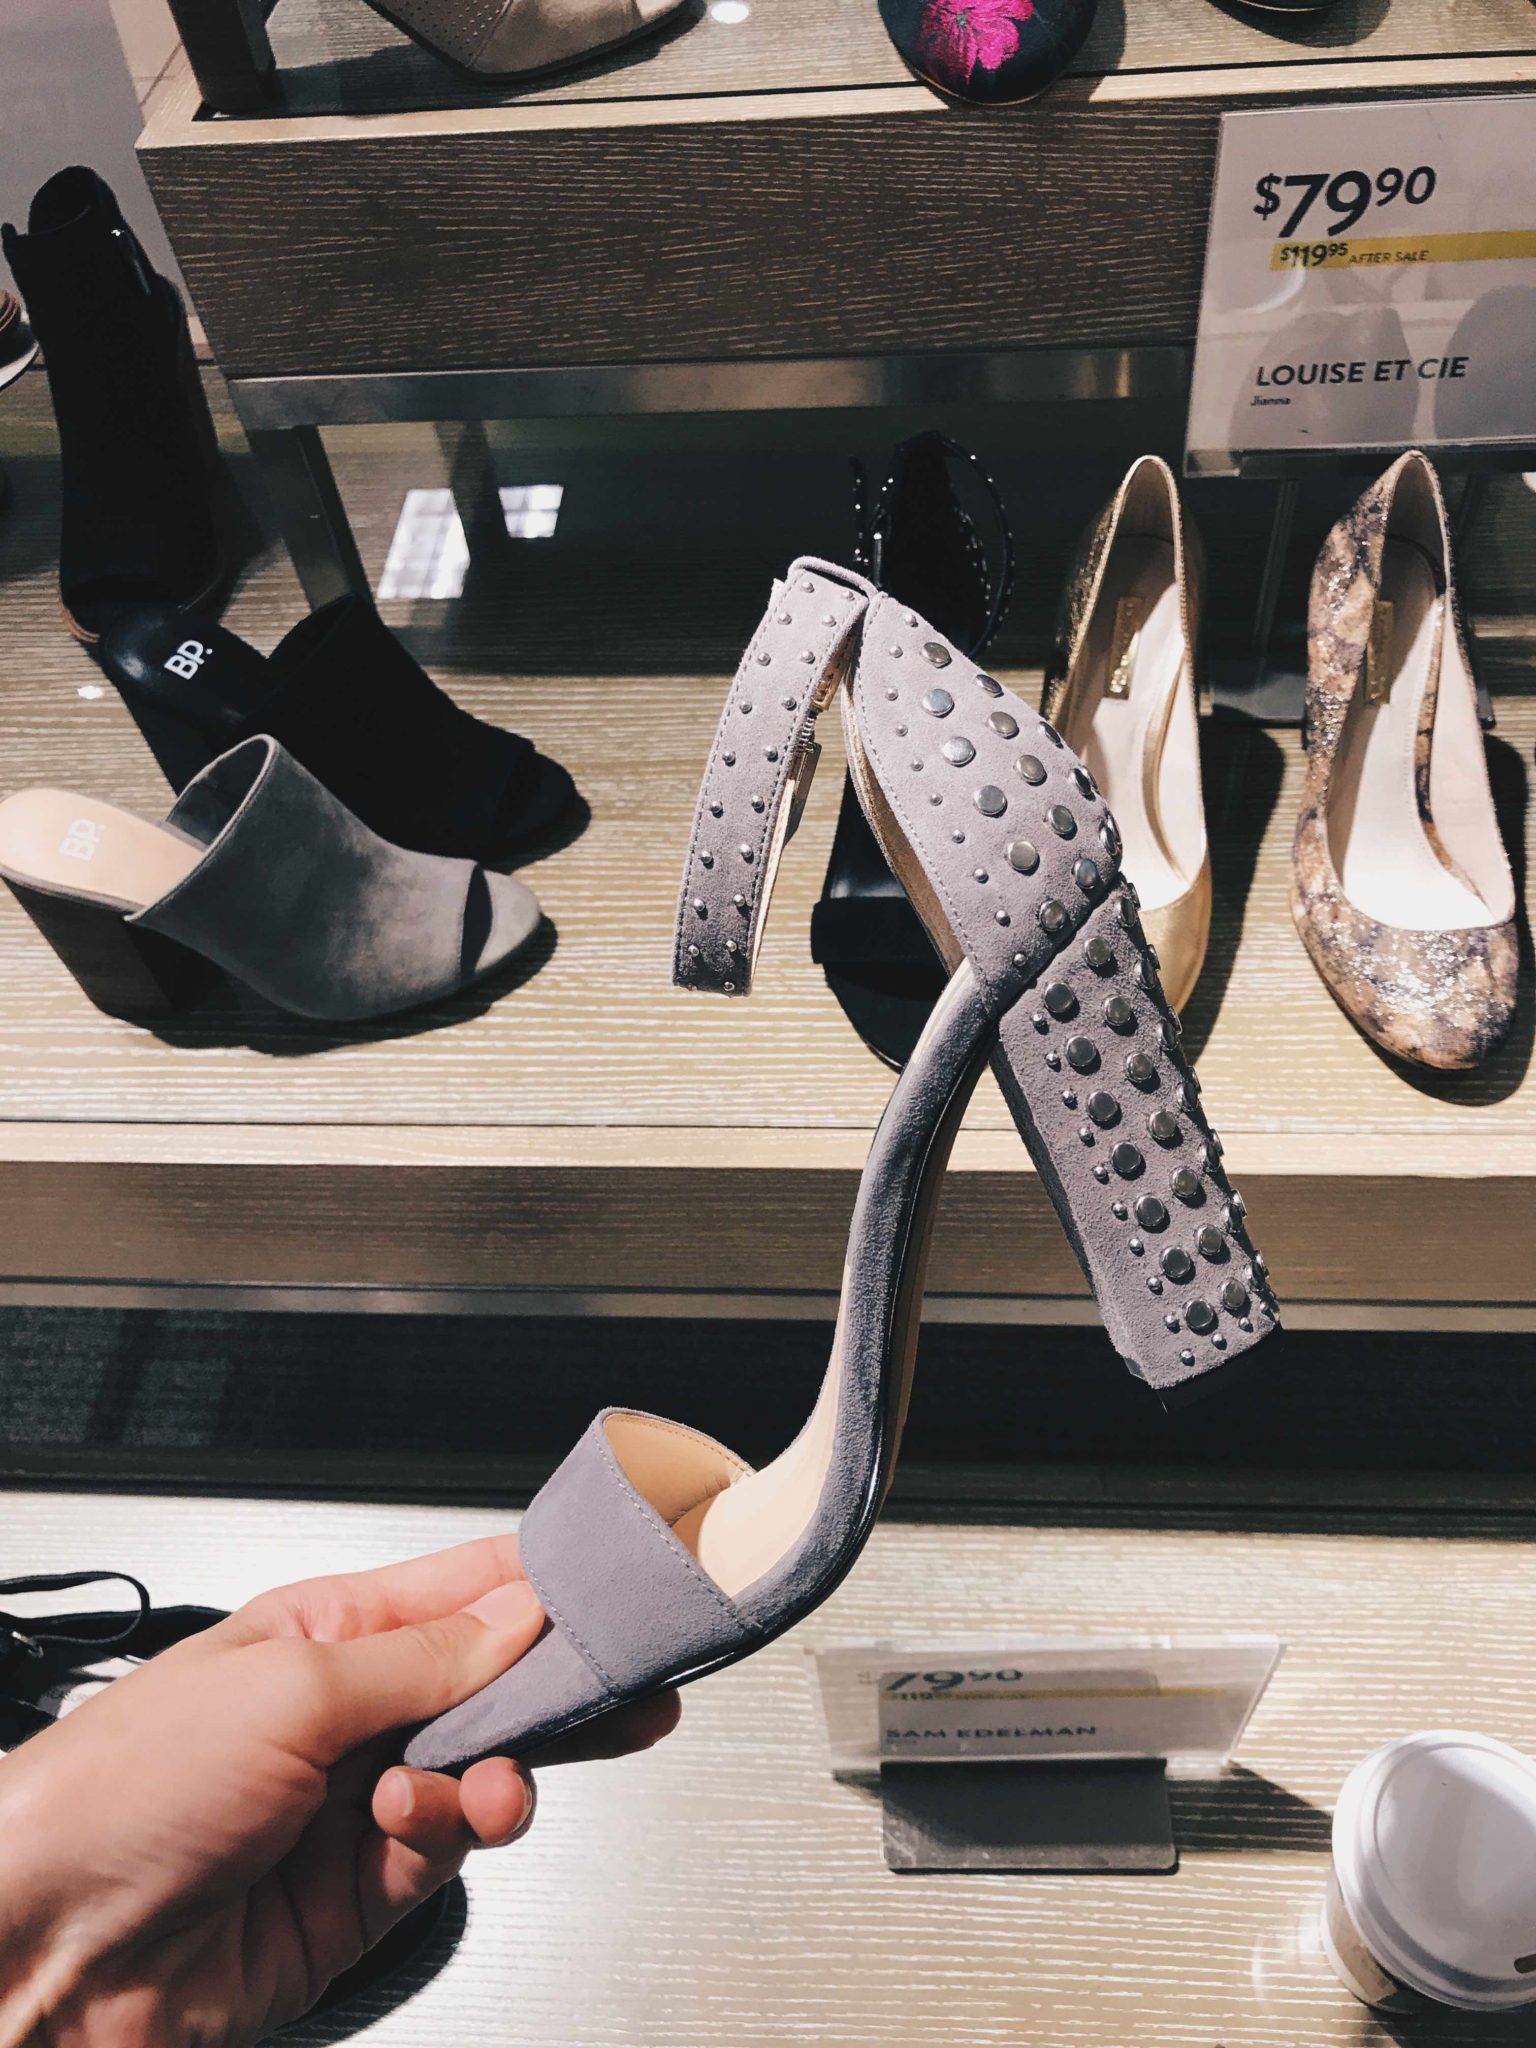 Austin Blogger DTKAustin is sharing her top must-have pieces from the 2017 Nordstrom Anniversary Sale. Dolce Vita Studded Heels | nordstrom sale must haves | what to buy from the nordstrom anniversary sale || Dressed to Kill